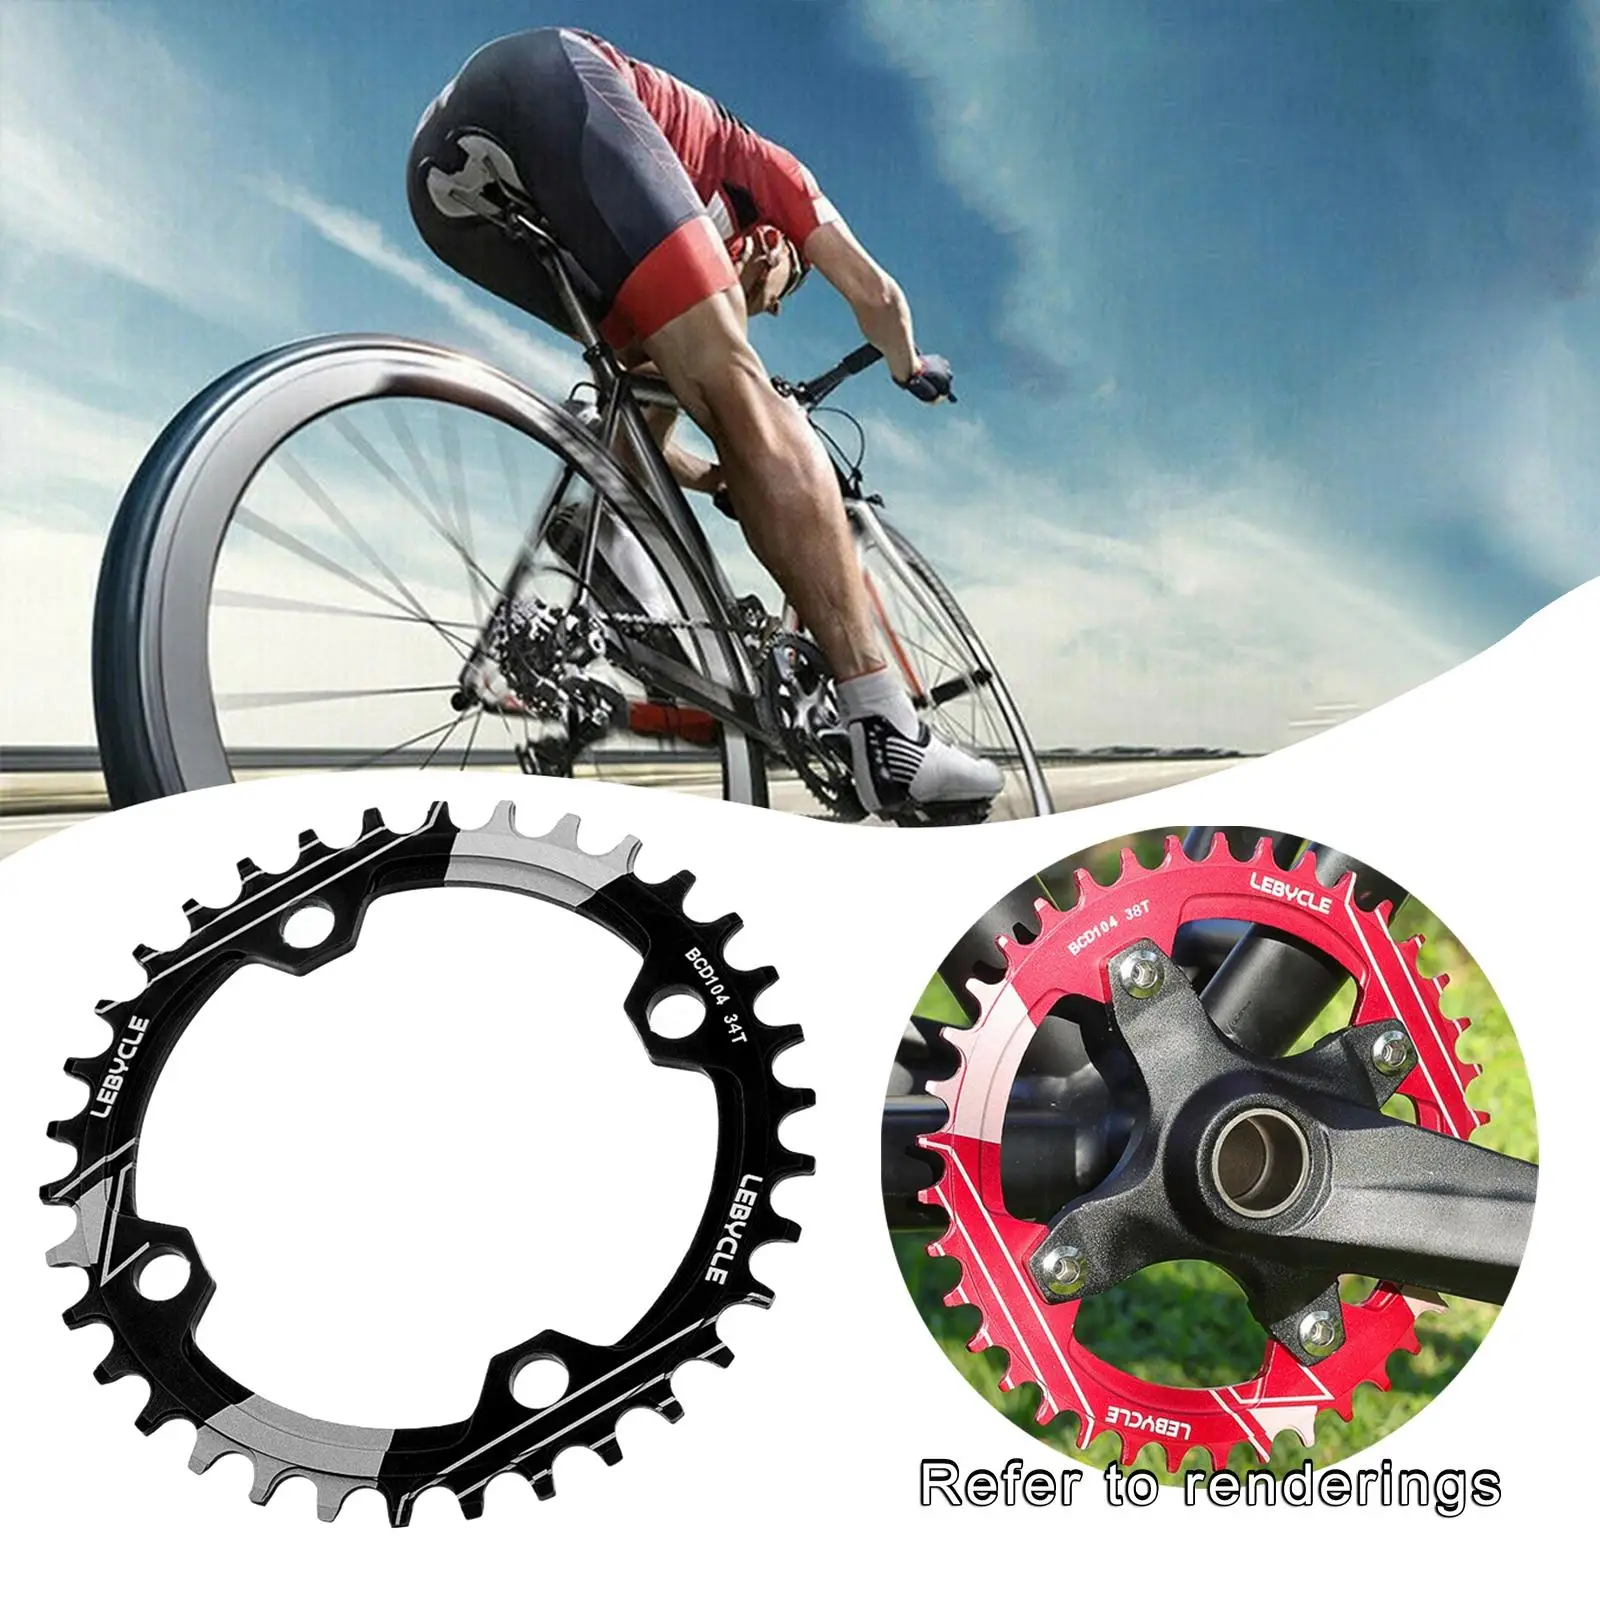 Round Mtb Chainring 104 BCD Narrow Wide Bike Crankset 32T 36T 38T 34 Teeth 104BCD Crown Mountain Bicycle Plate Chain Ring